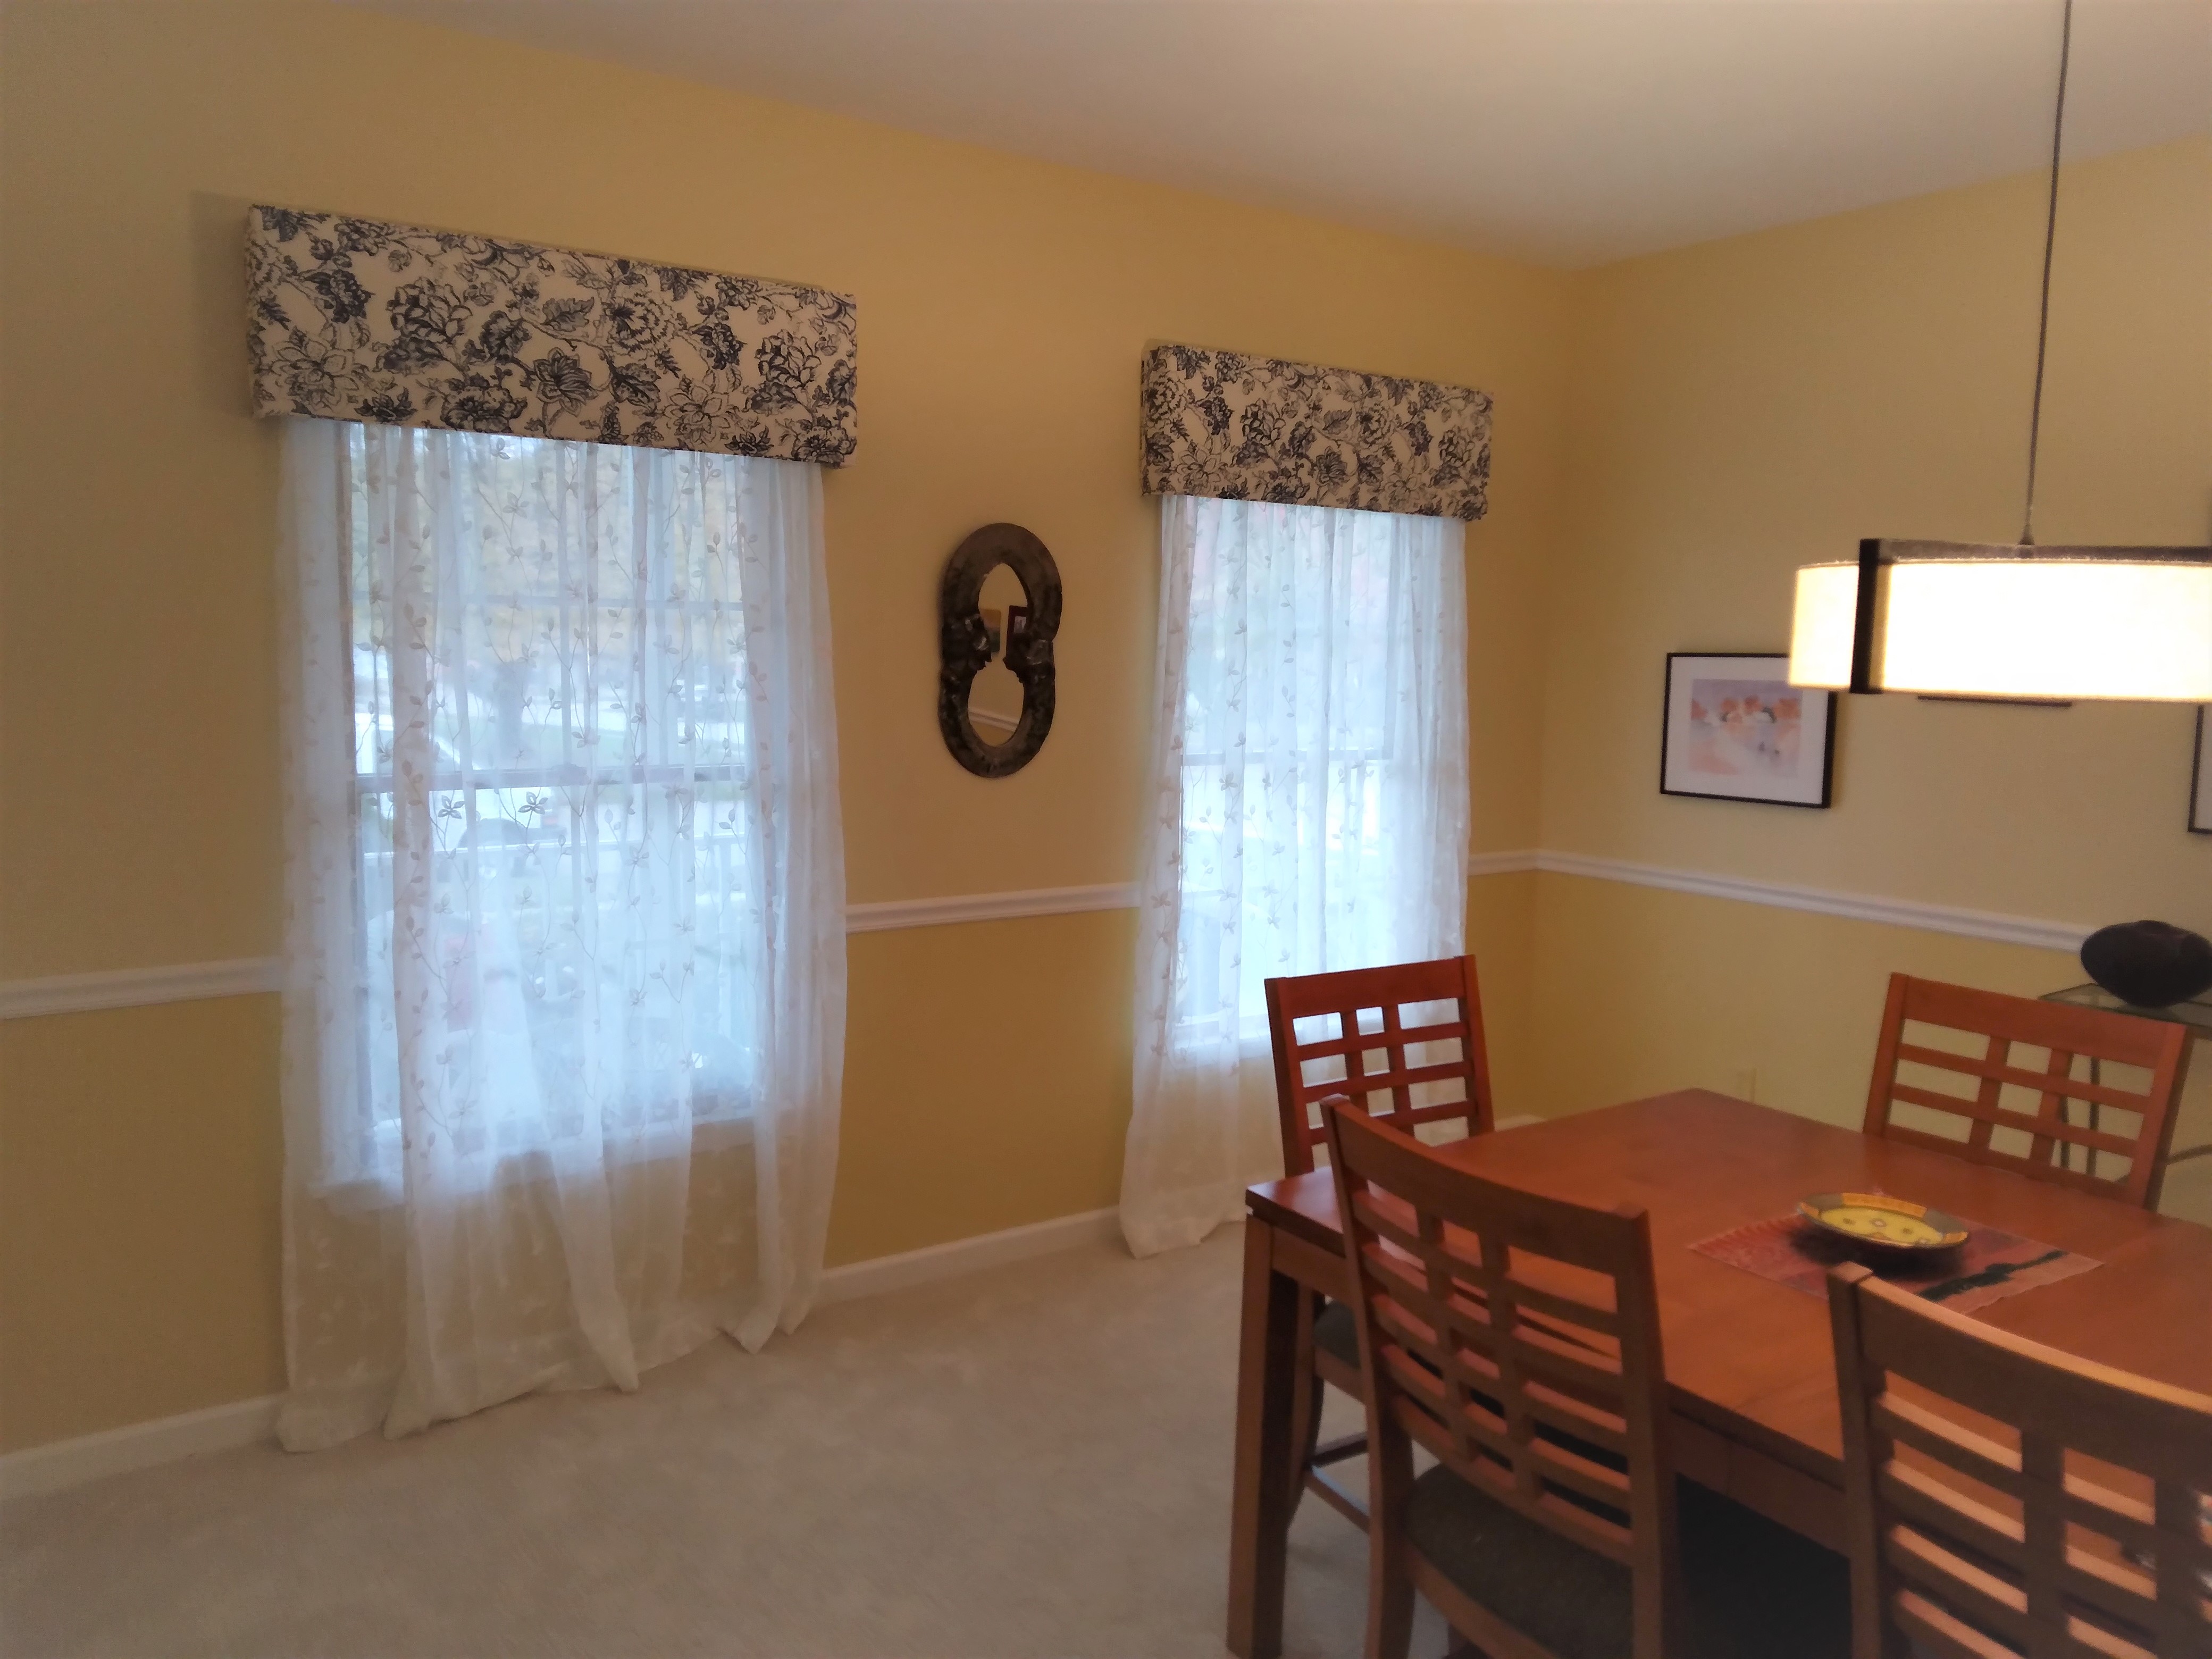 Cornices with sheer drapery in Springfield Illinois dining room.  BudgetBlinds  WindowCoverings  Cornices  SpringfieldIllinois